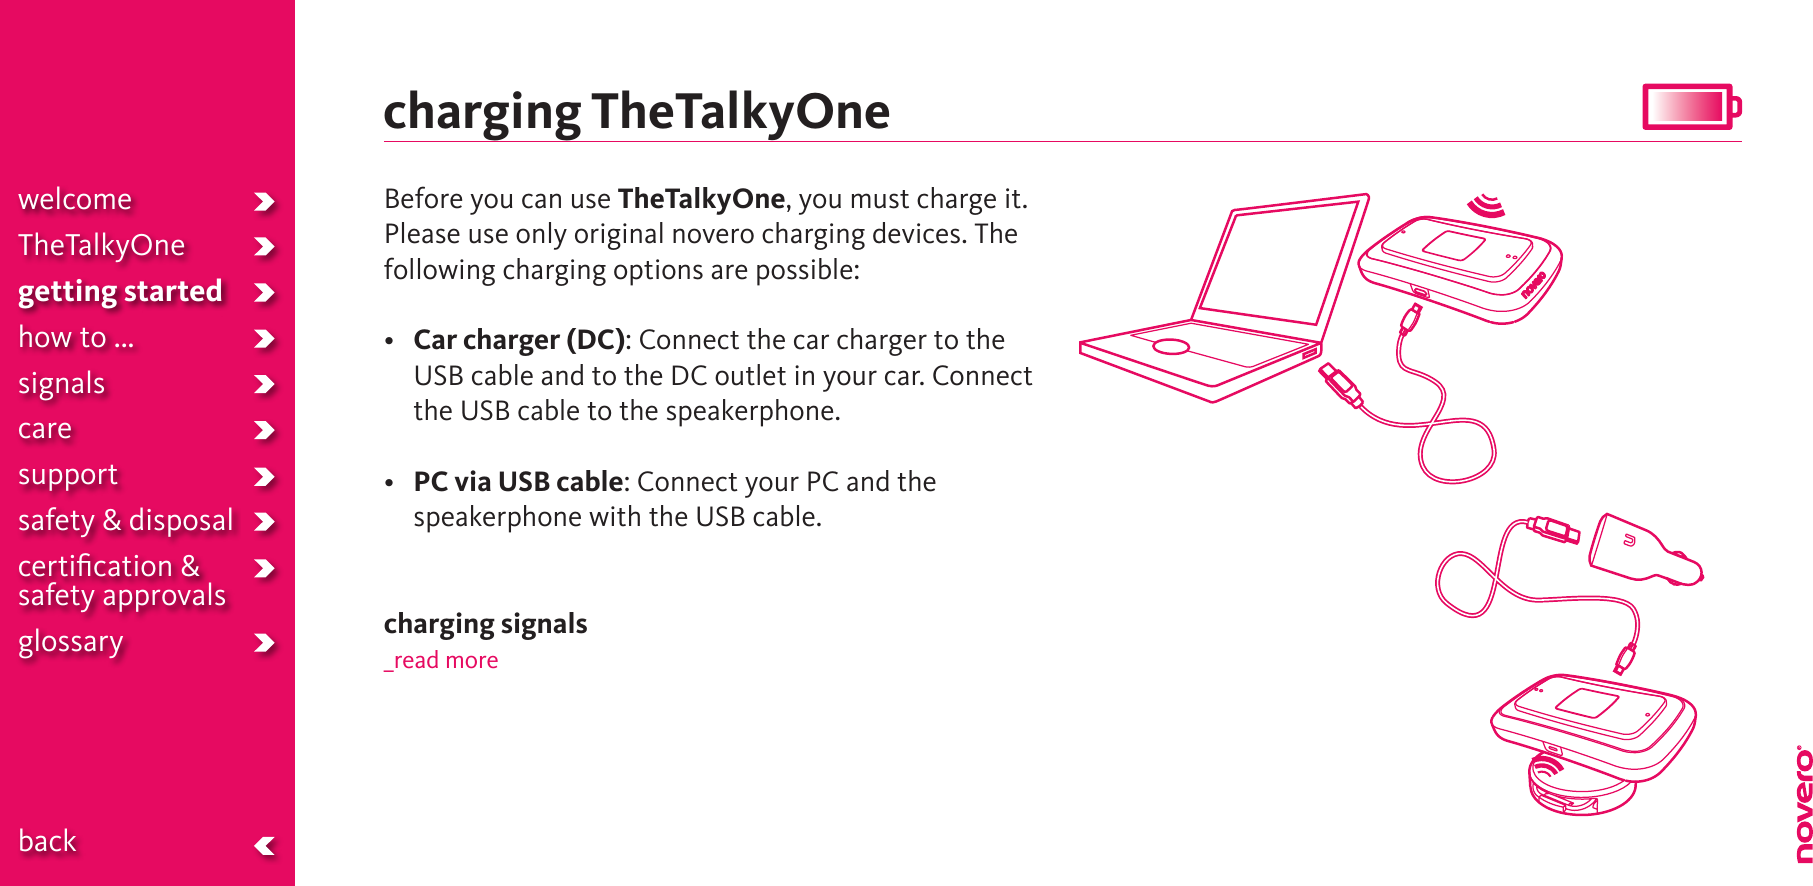 charging TheTalkyOneBefore you can use TheTalkyOne, you must charge it. Please use only original novero charging devices. The following charging options are possible:• Car charger (DC): Connect the car charger to the USB cable and to the DC outlet in your car. Connect the USB cable to the speakerphone.• PC via USB cable: Connect your PC and the speakerphone with the USB cable. charging signals_read morewelcomeTheTalkyOnegetting startedhow to ...signalscaresupportsafety &amp; disposalcertiﬁcation &amp;  safety approvals glossary  back